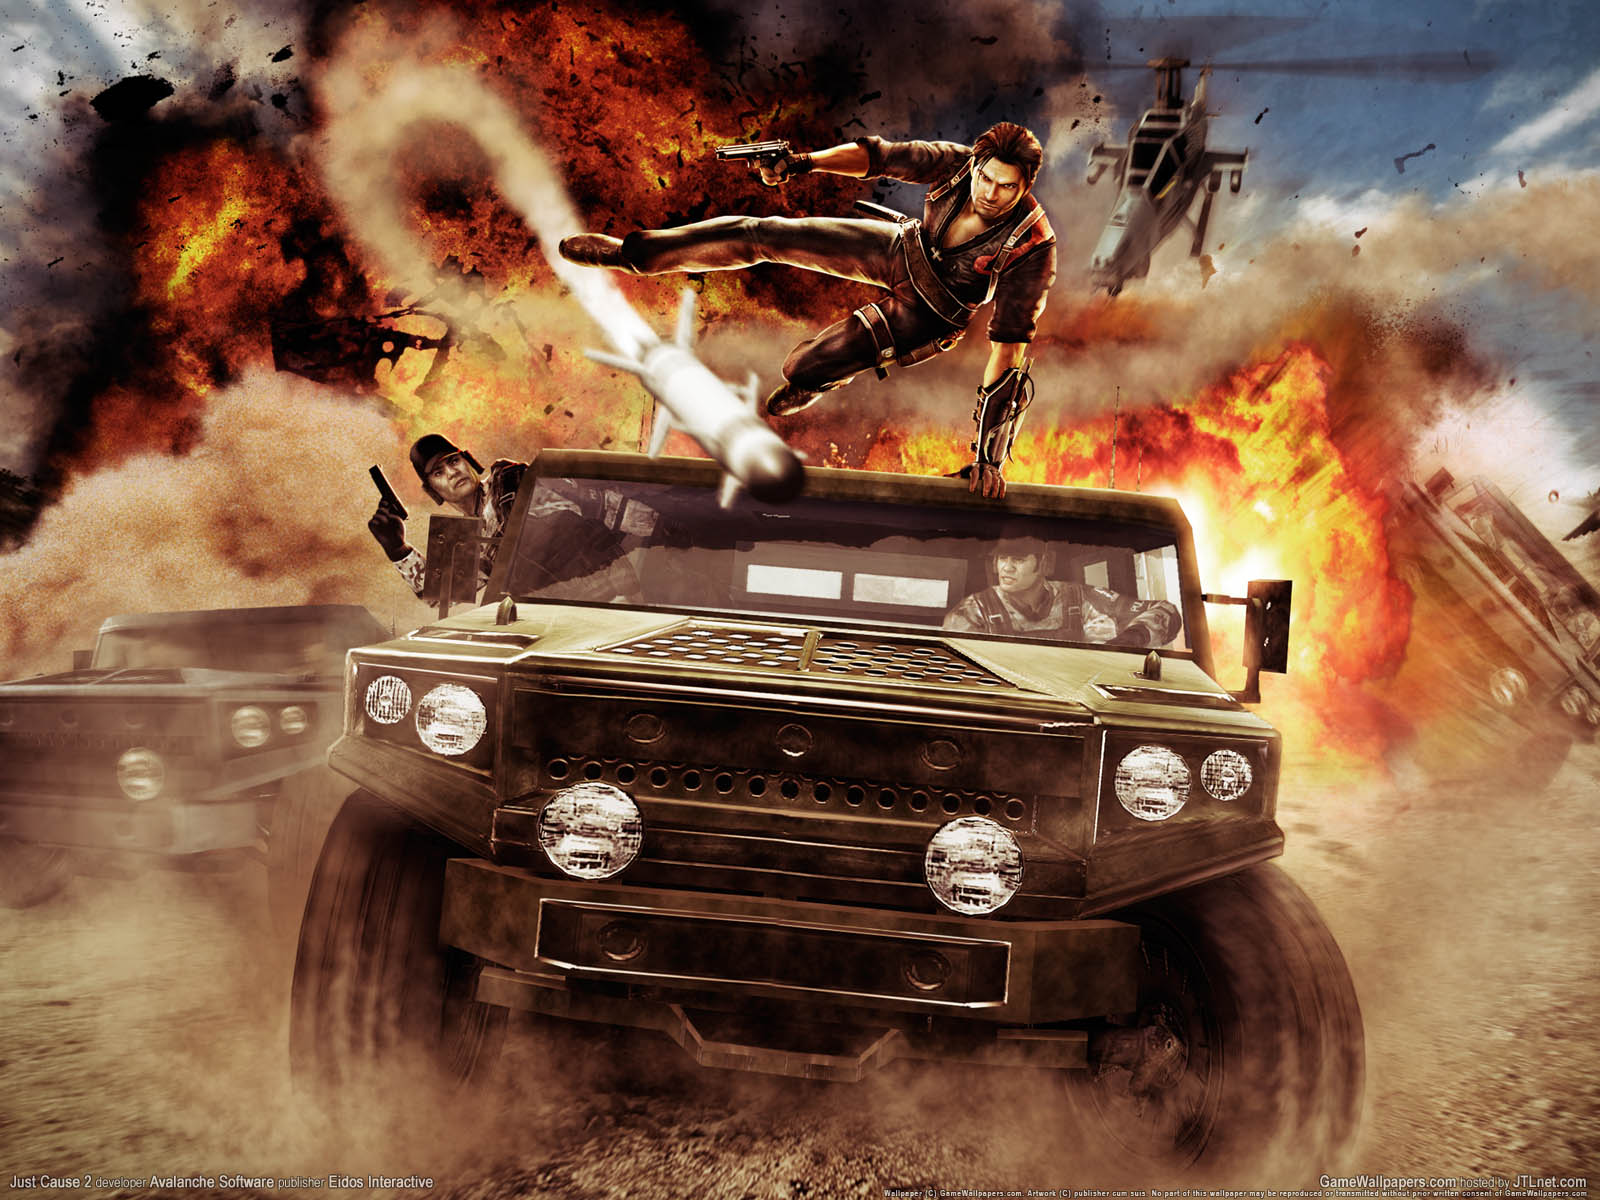 Just Cause 2 wallpaper 01 1600x1200